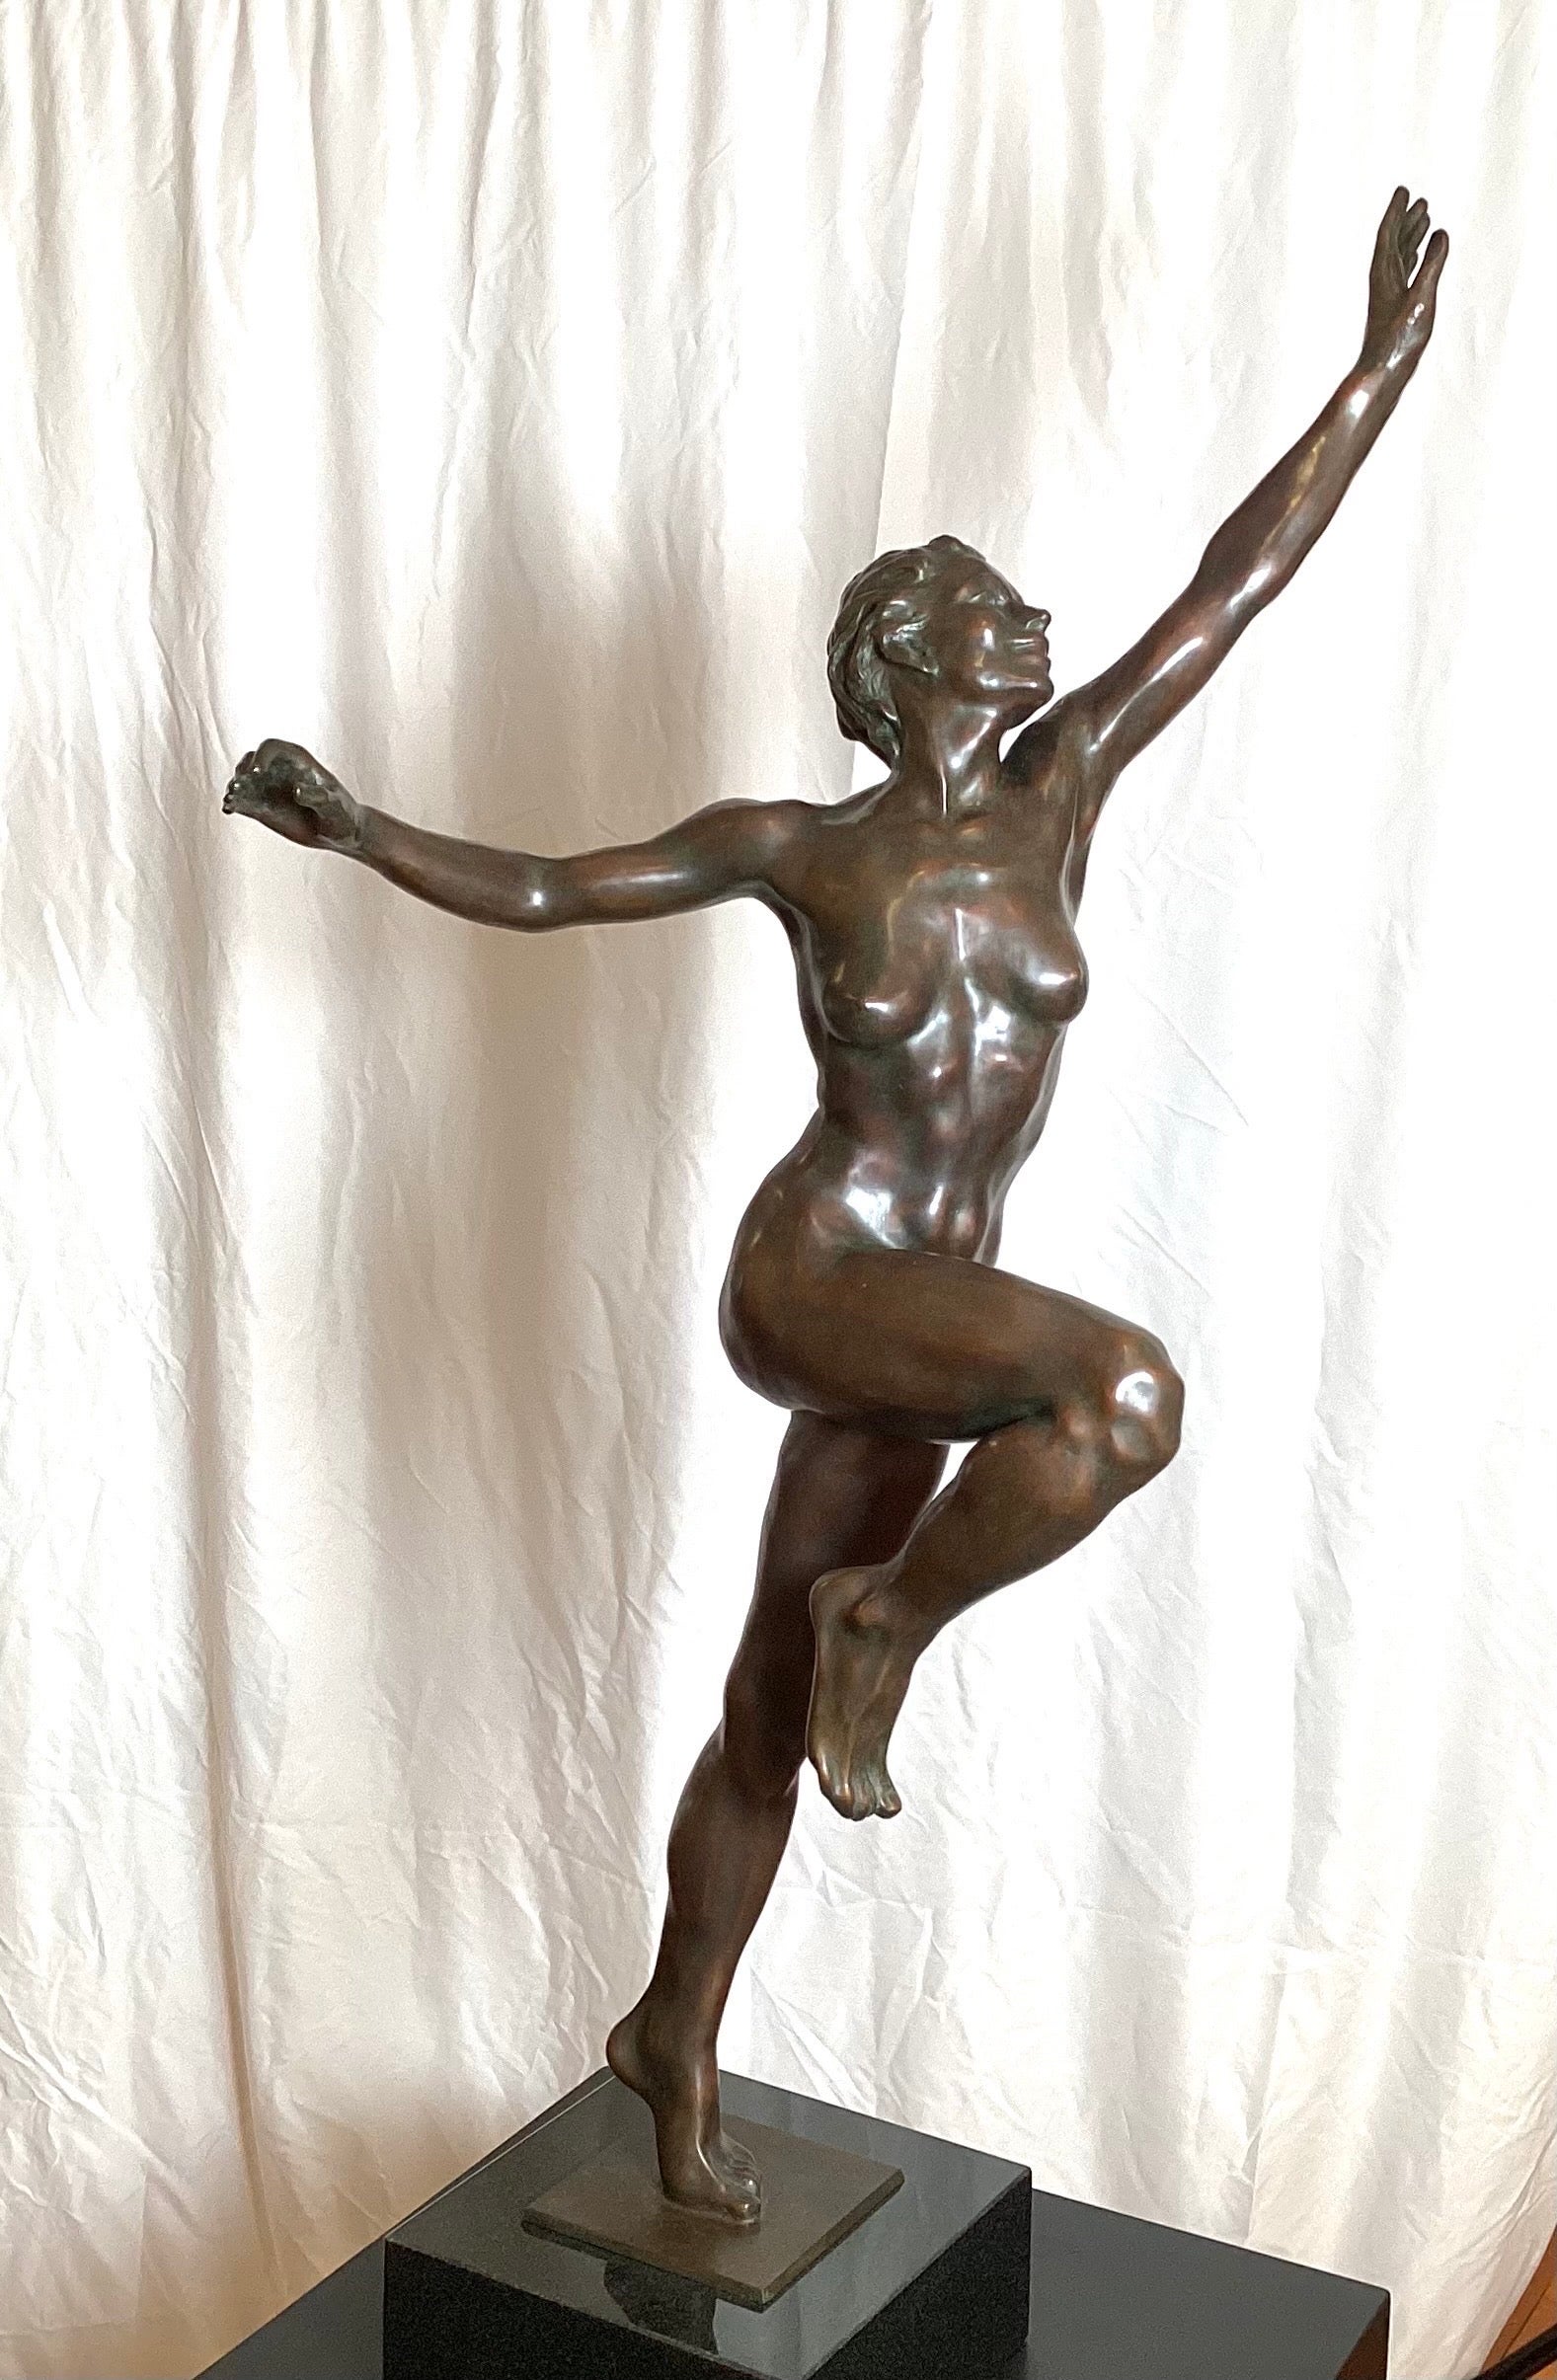 An wonderful patinated bronze female nude sculpture titled Joy, by Norwegian American Artist Kristen Kokkin. The impressive bronze on a dark marble base conveys a sense of joy and measures 46 inches high.  CIrca 1980's

Kokkin made her debut at the